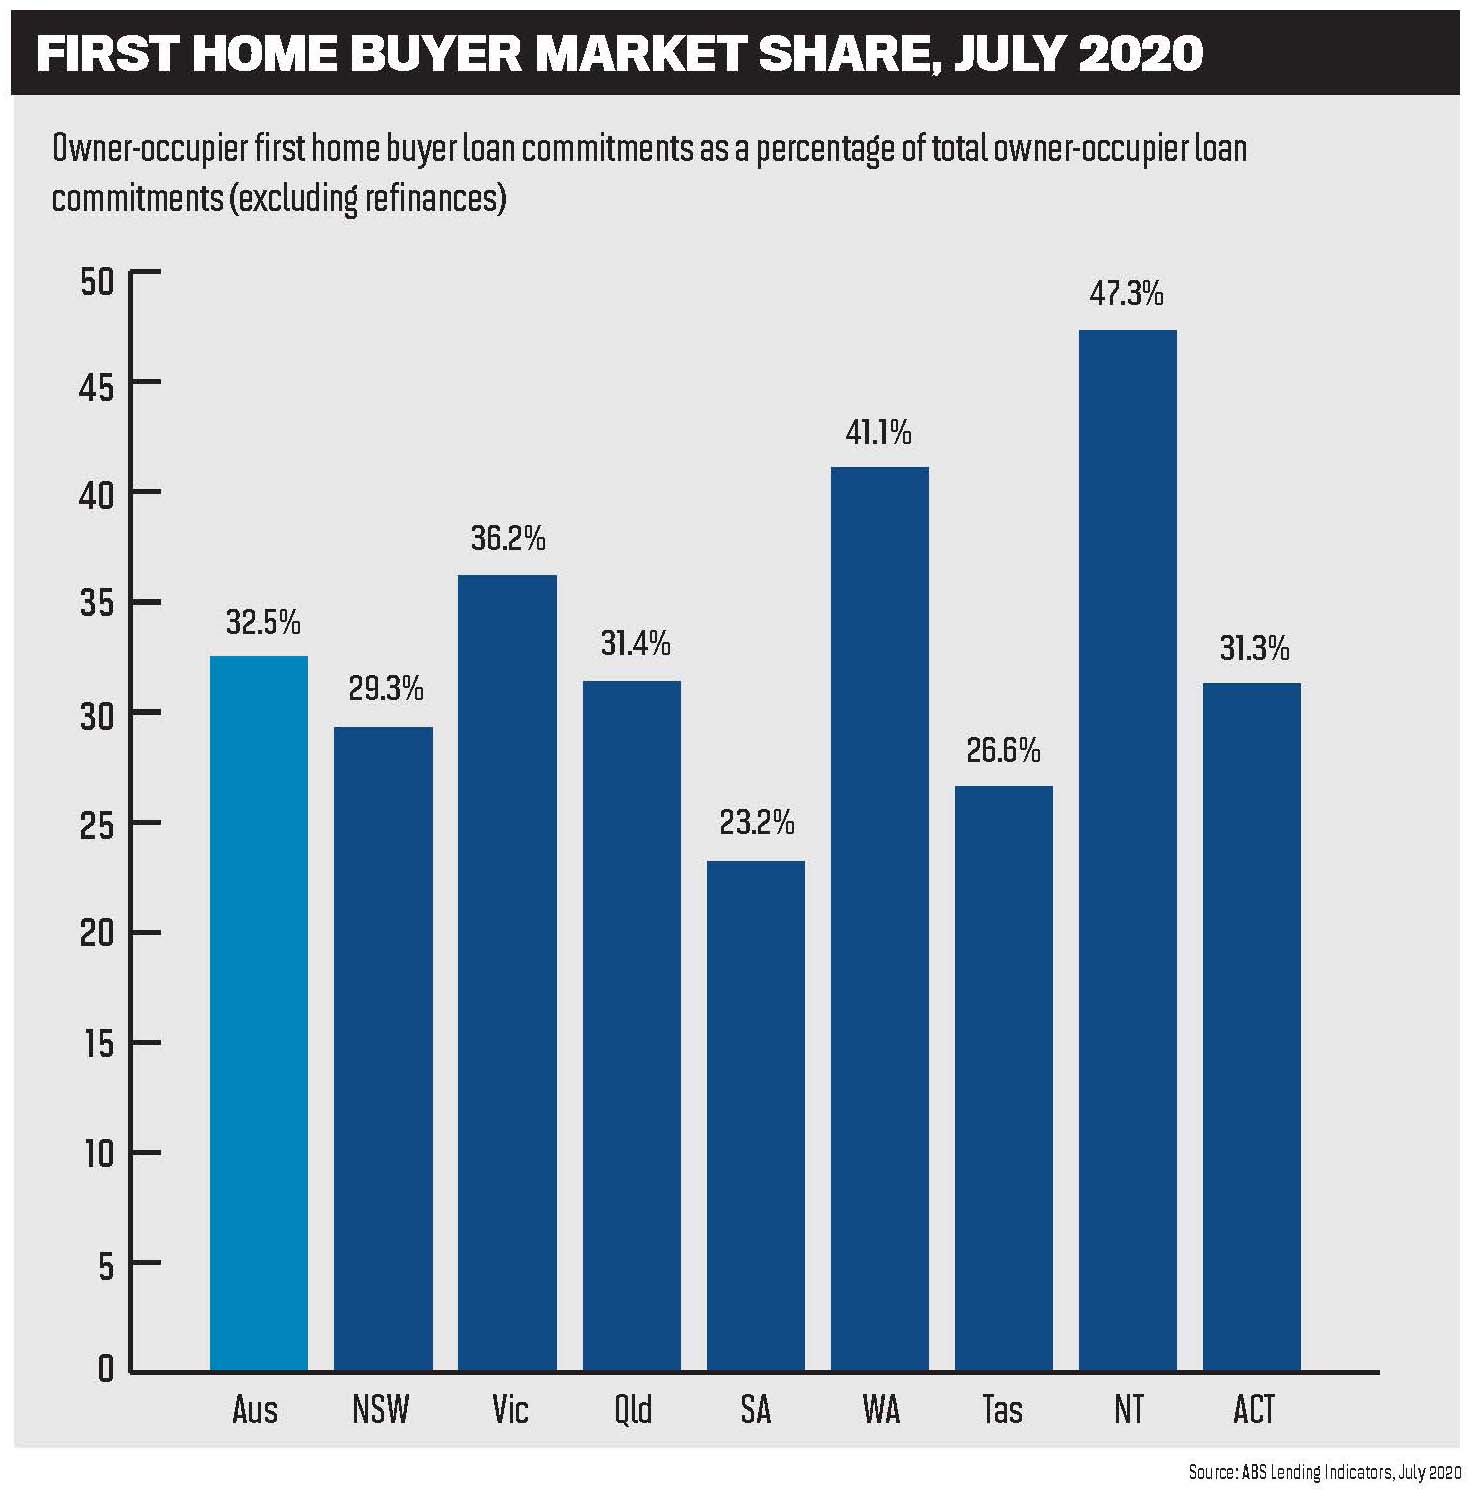 First home buyer market share, July 2020